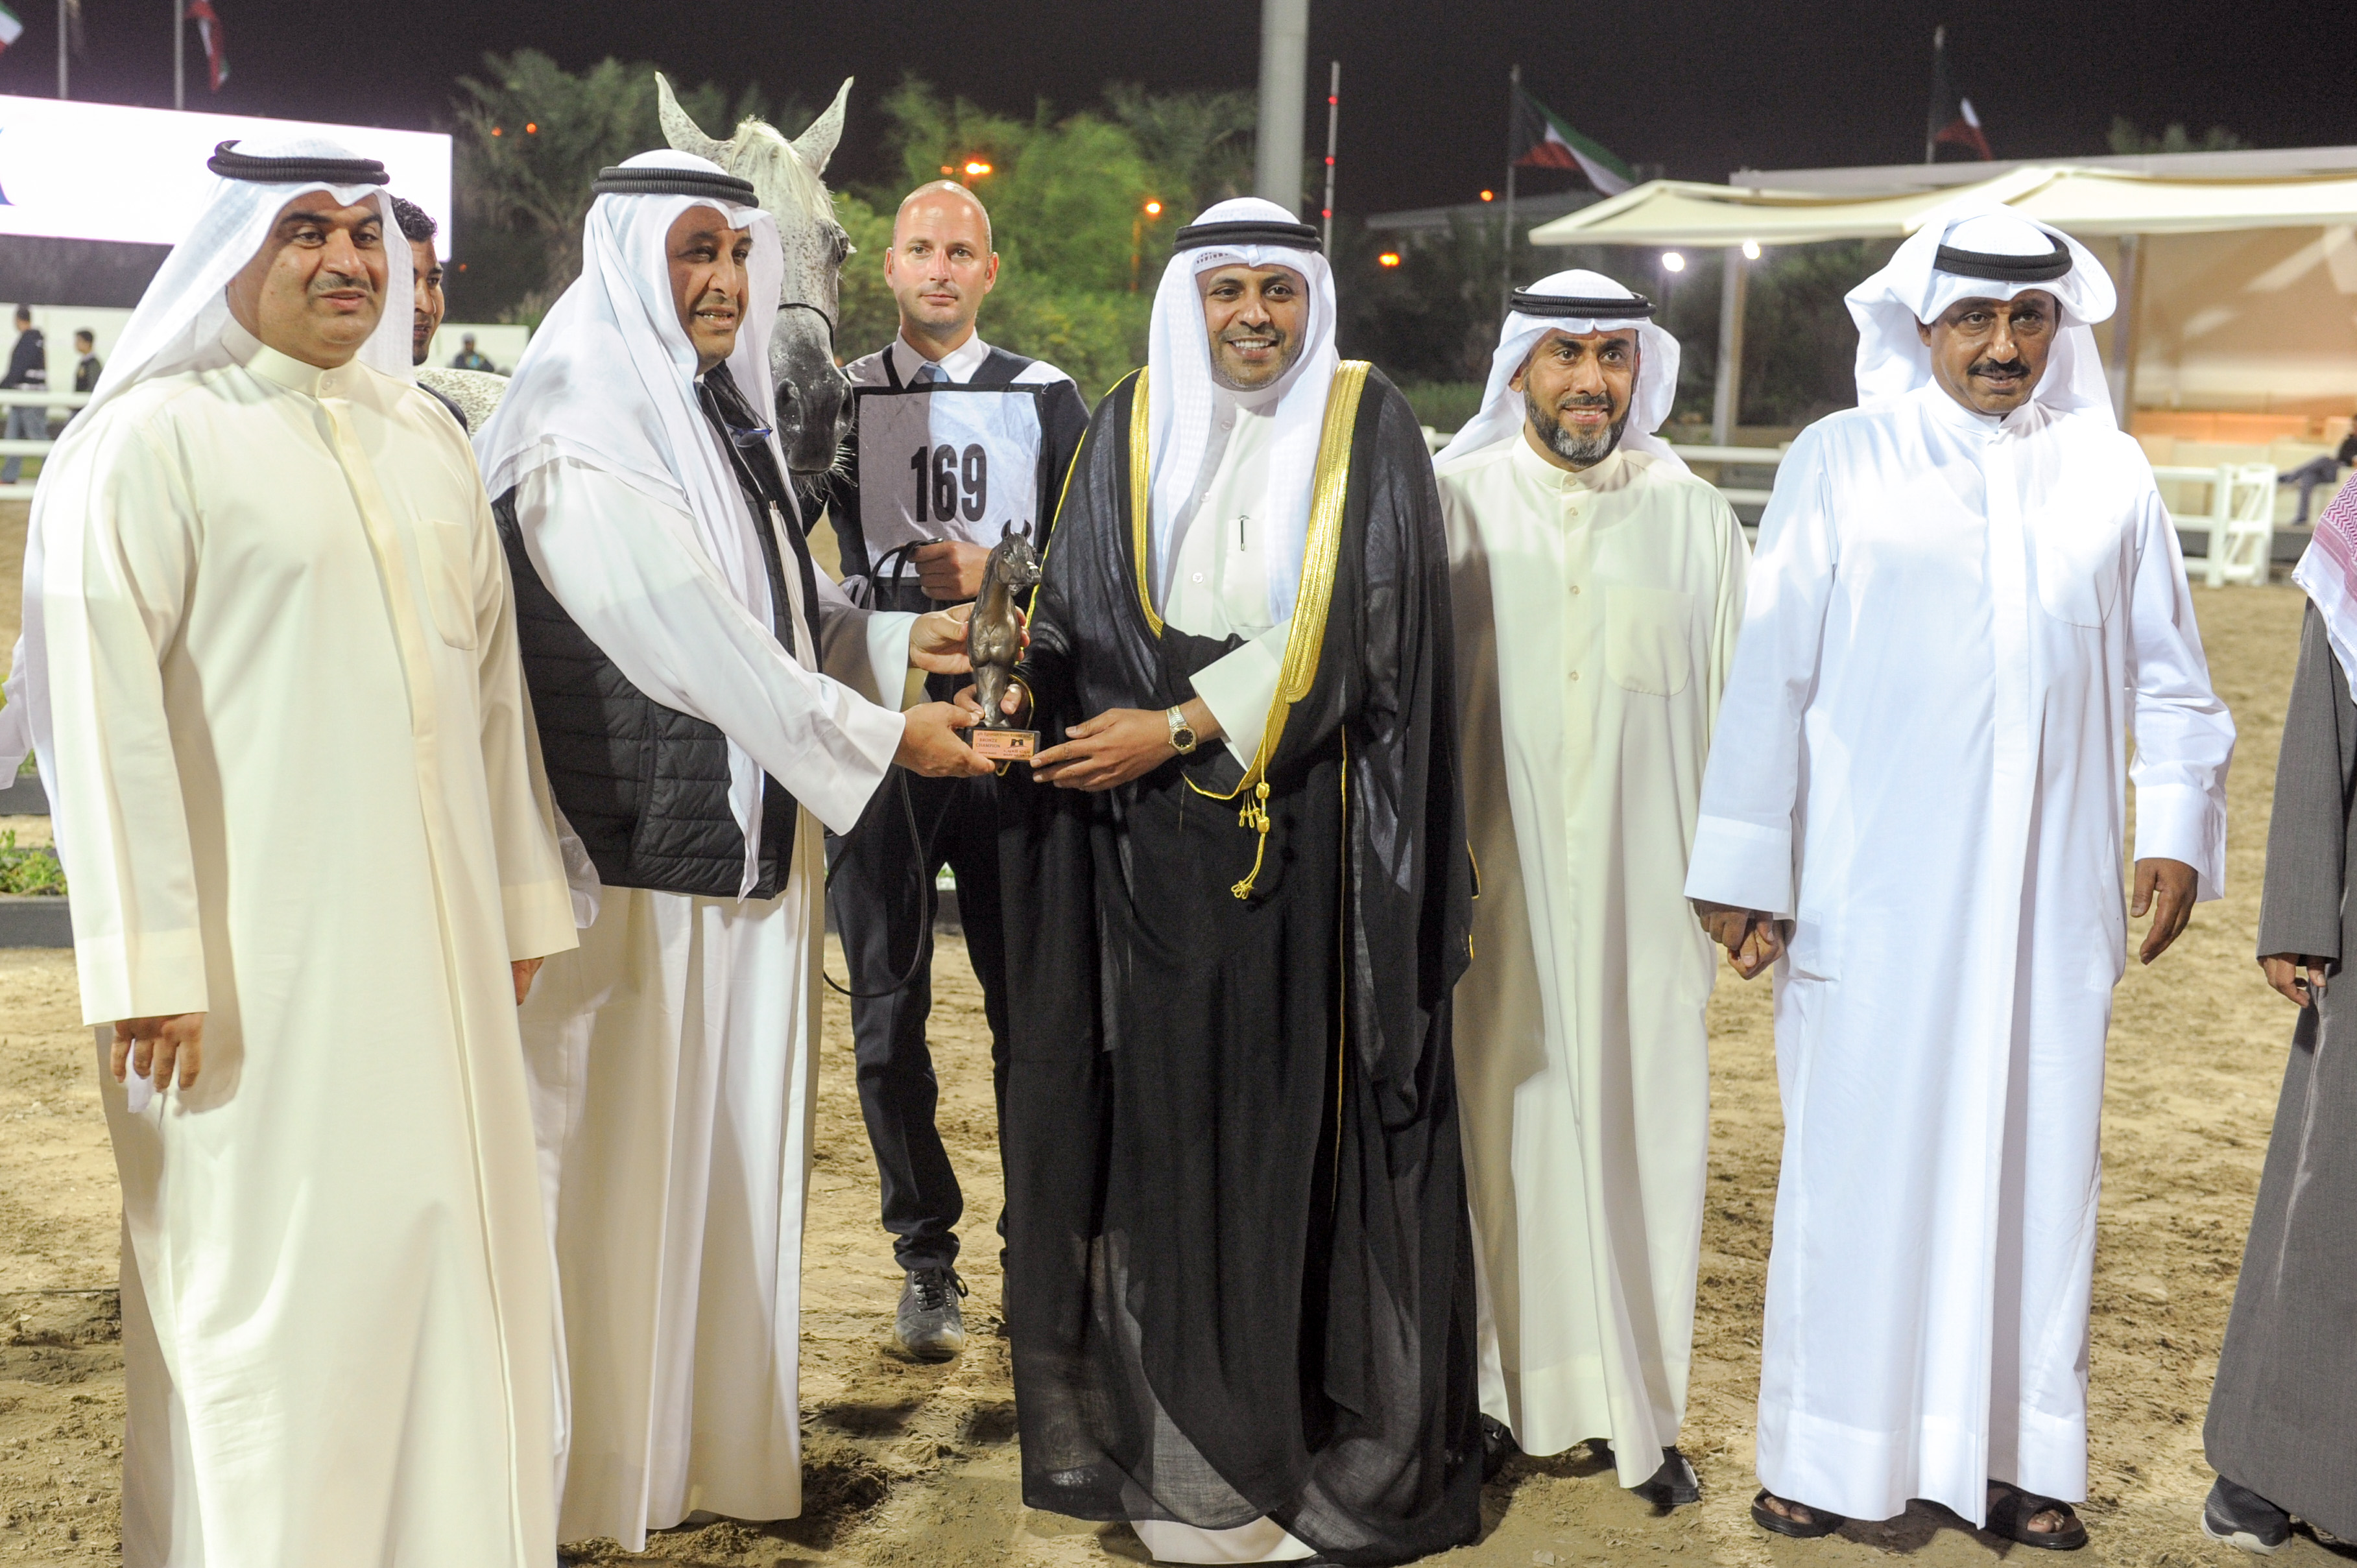 Minister of Information and Minister of State for Youth Affairs Mohammad Al-Jabri honors the Champions